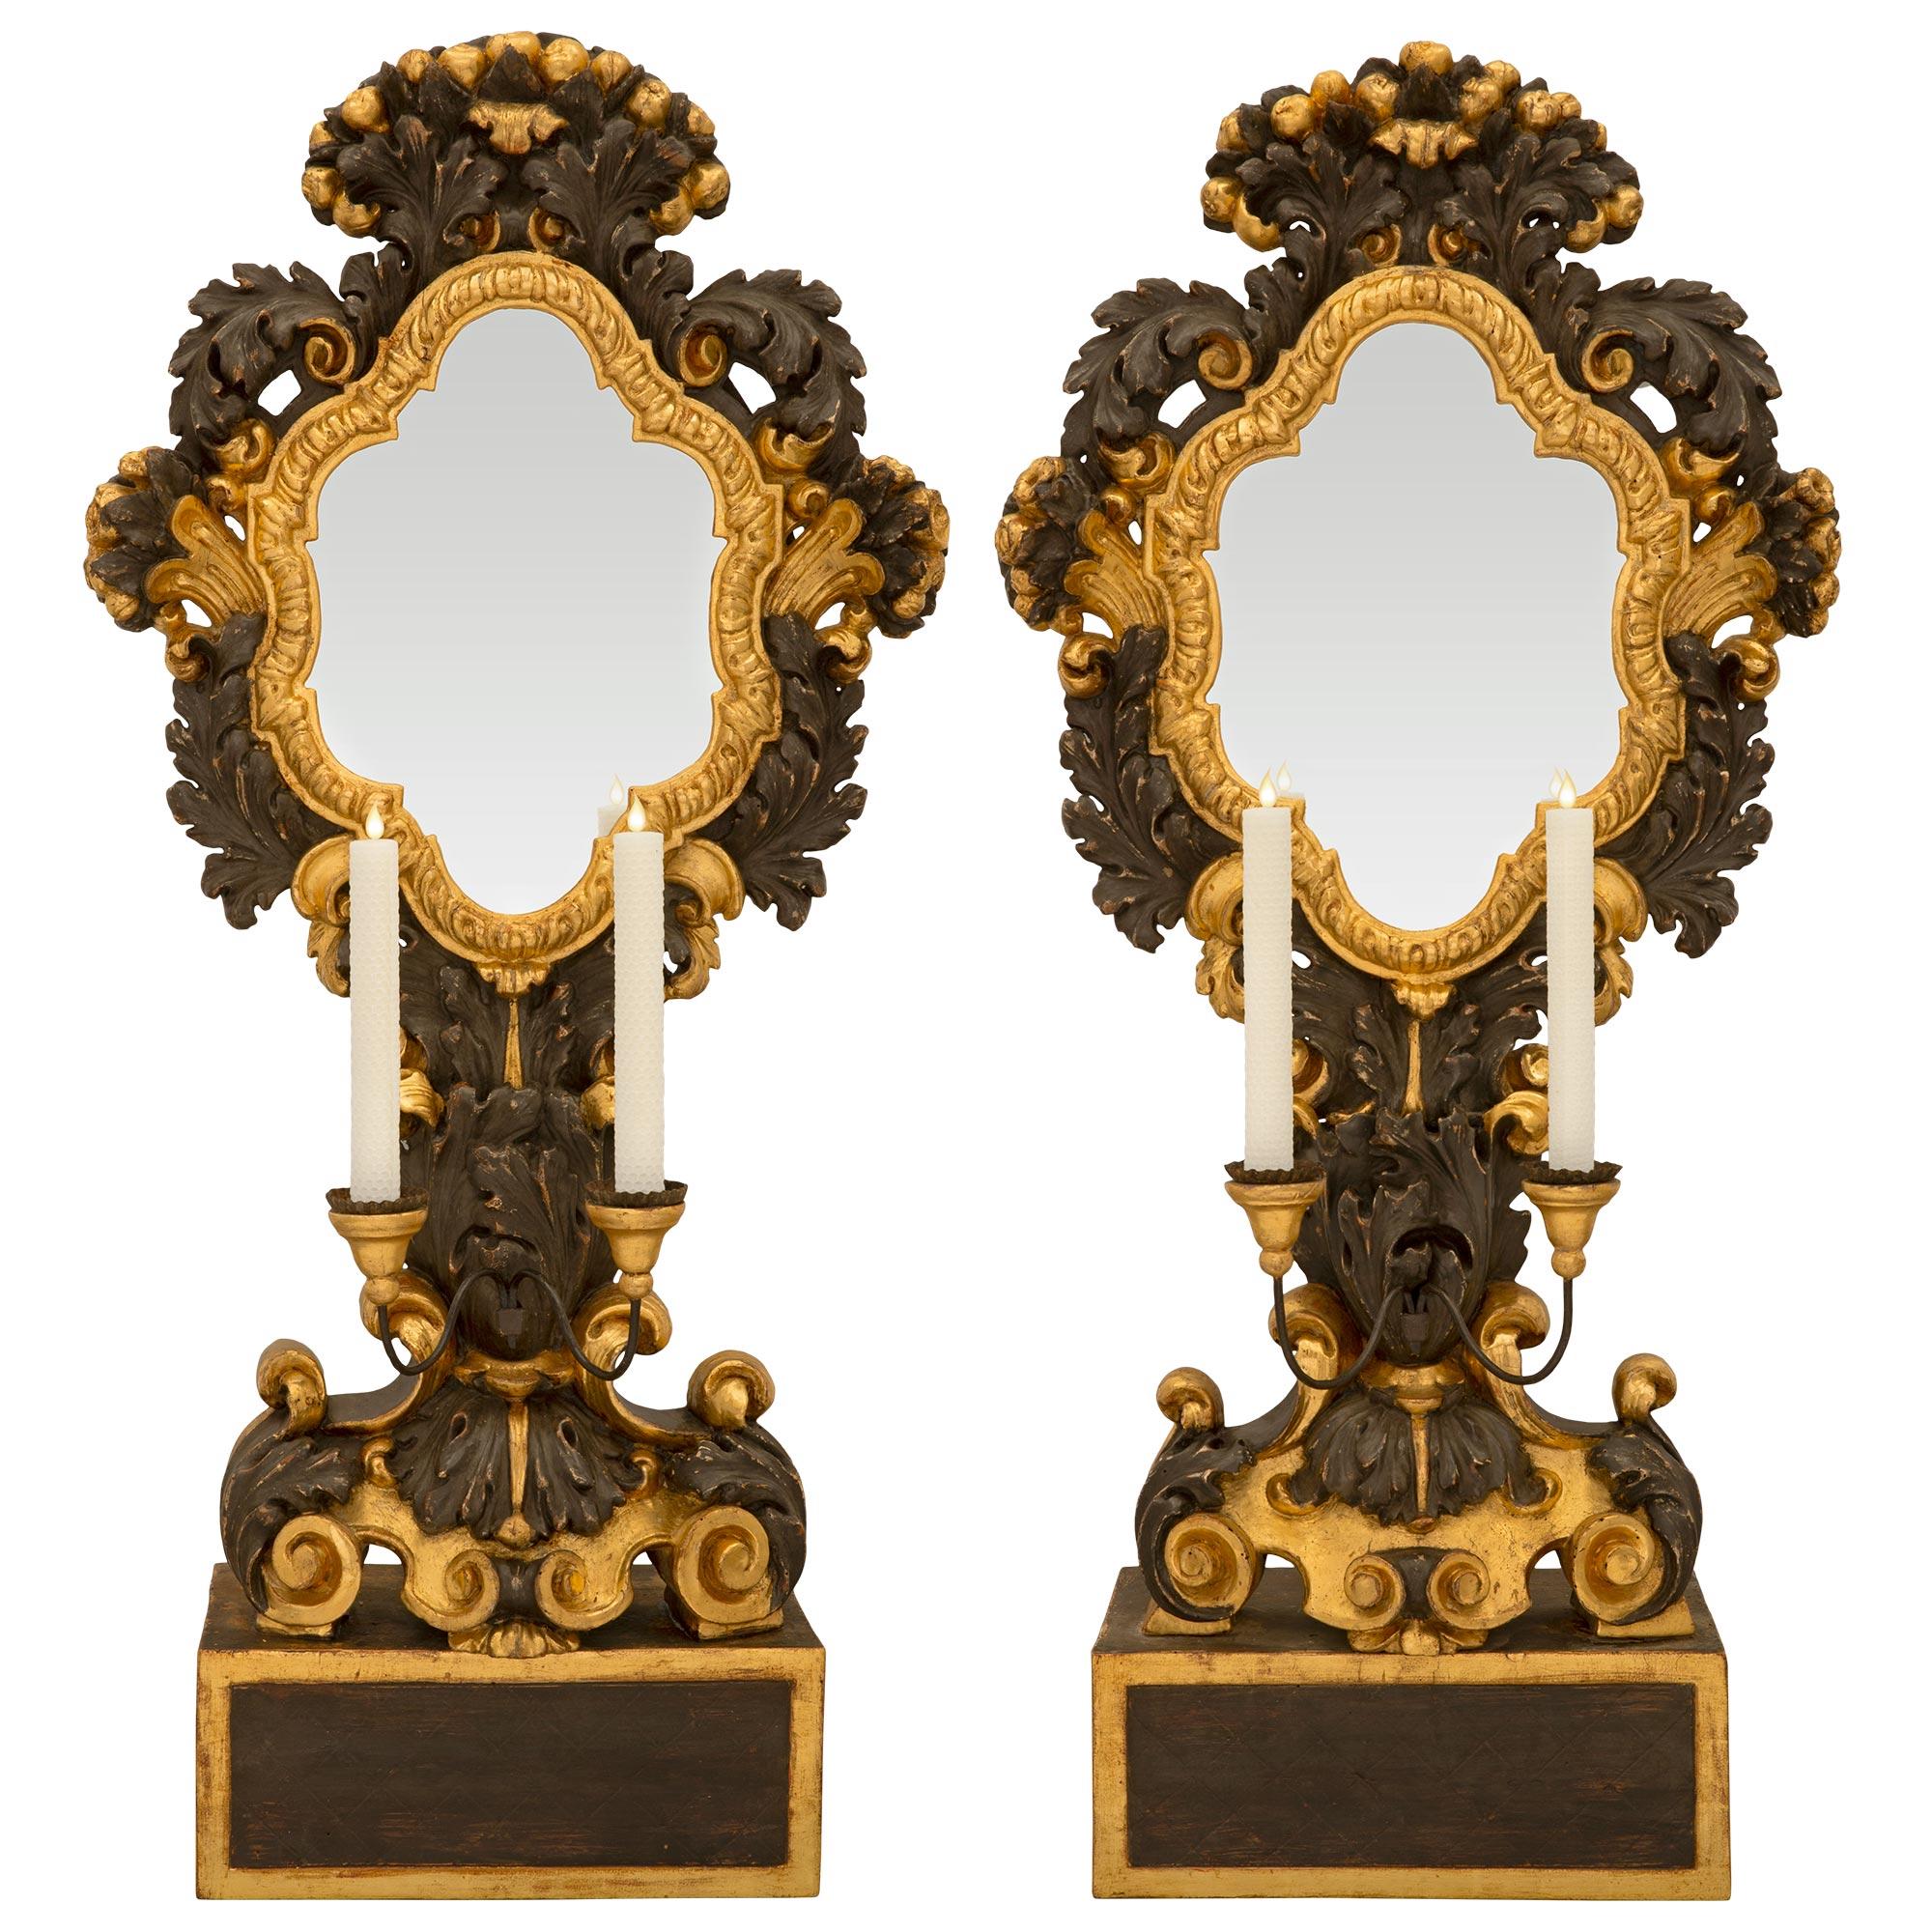 Pair Of Italian Late 17th Century Baroque Period Giltwood Mirrored Candelabras For Sale 5